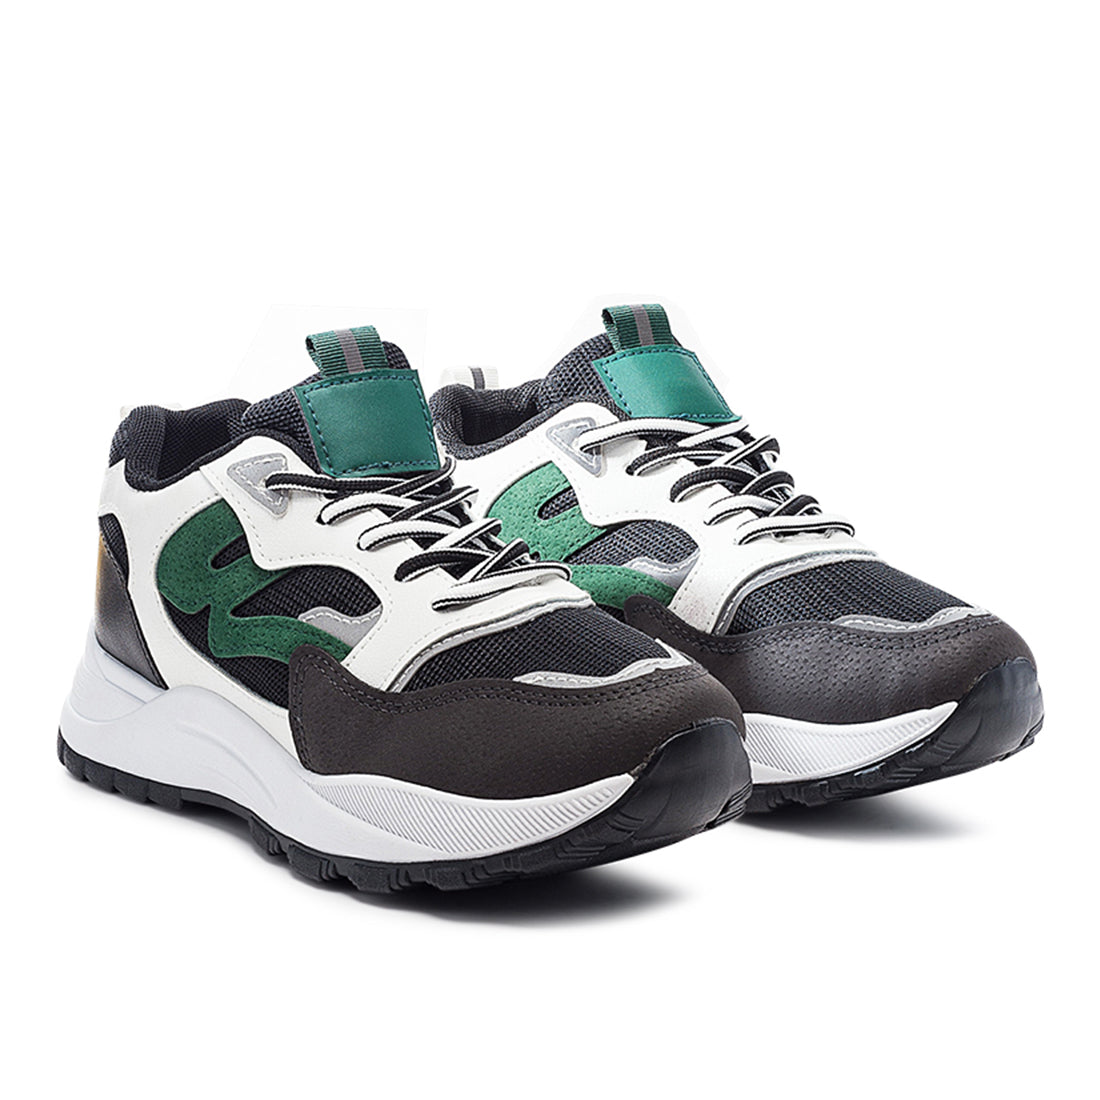 High Active Running Shoes in Green - Green